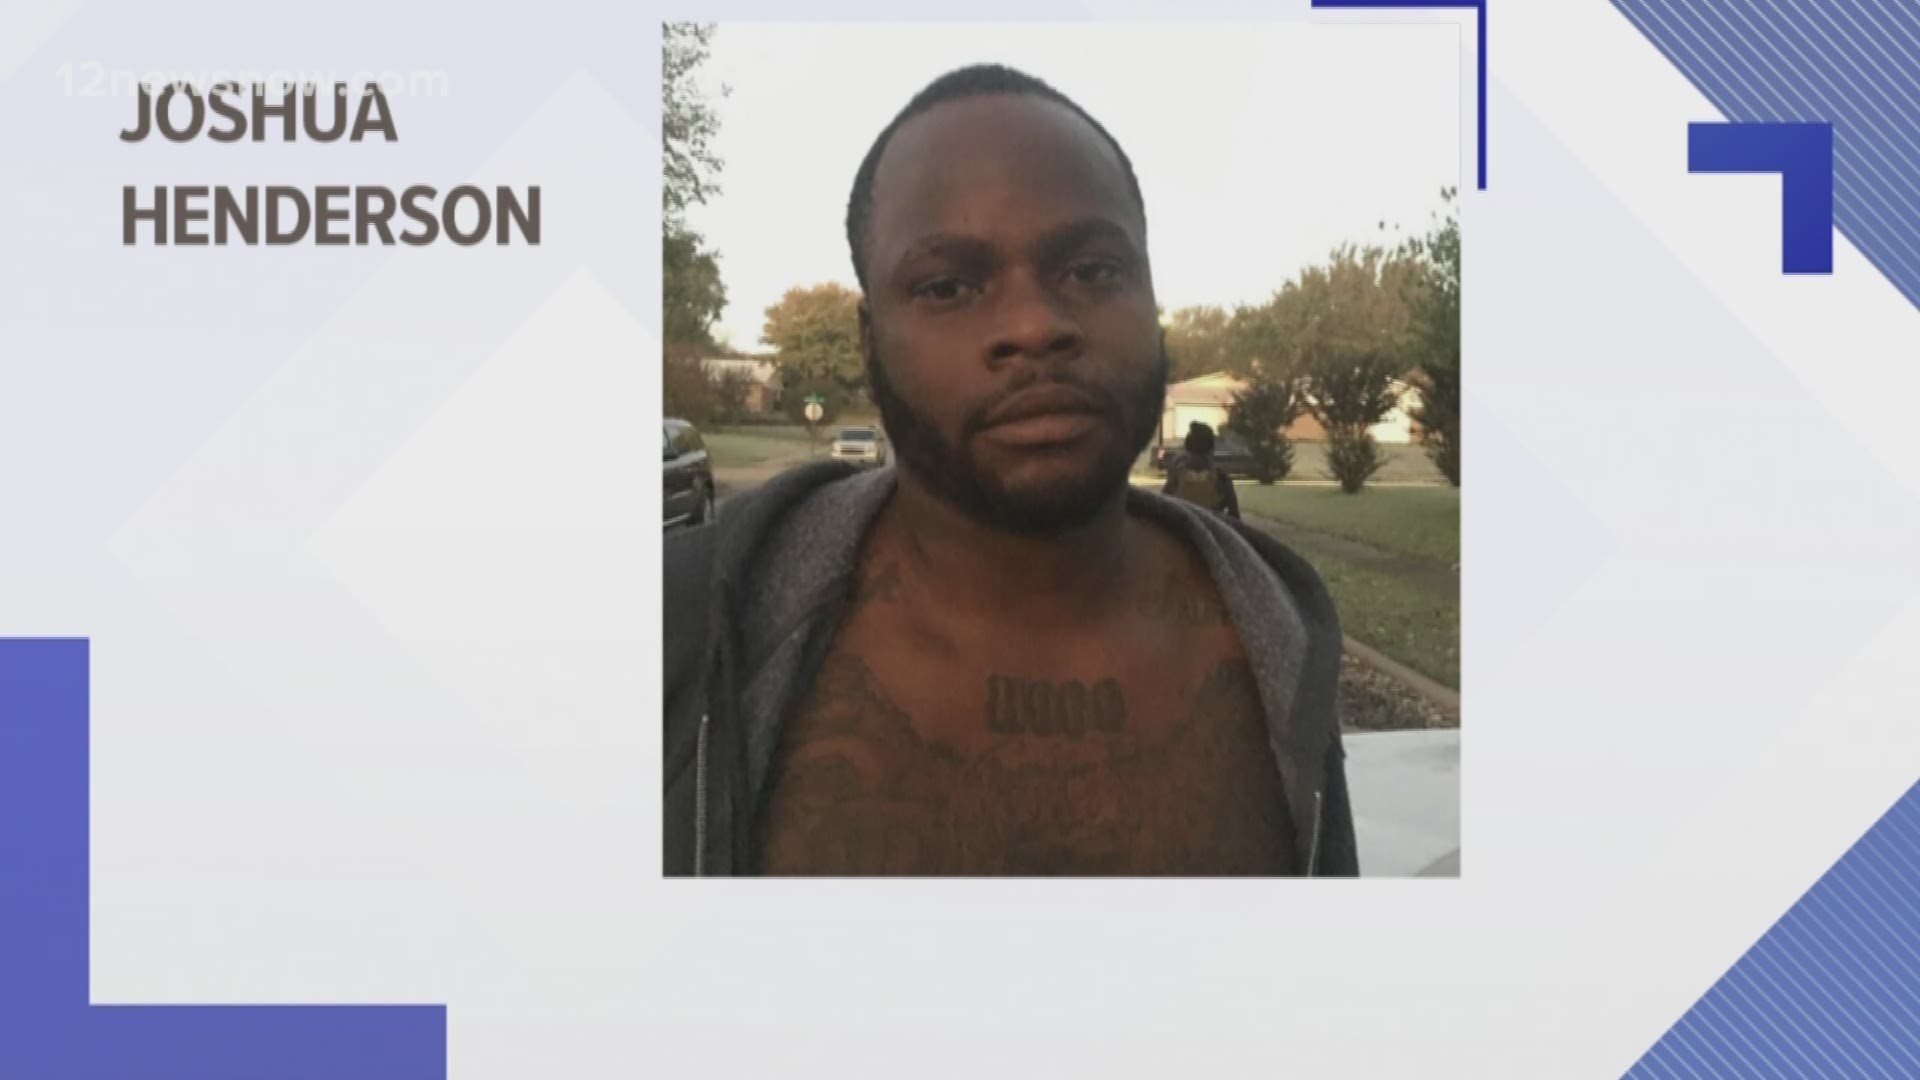 Henderson was found hiding in the trunk of a vehicle in Dallas by U.S. Marshals.